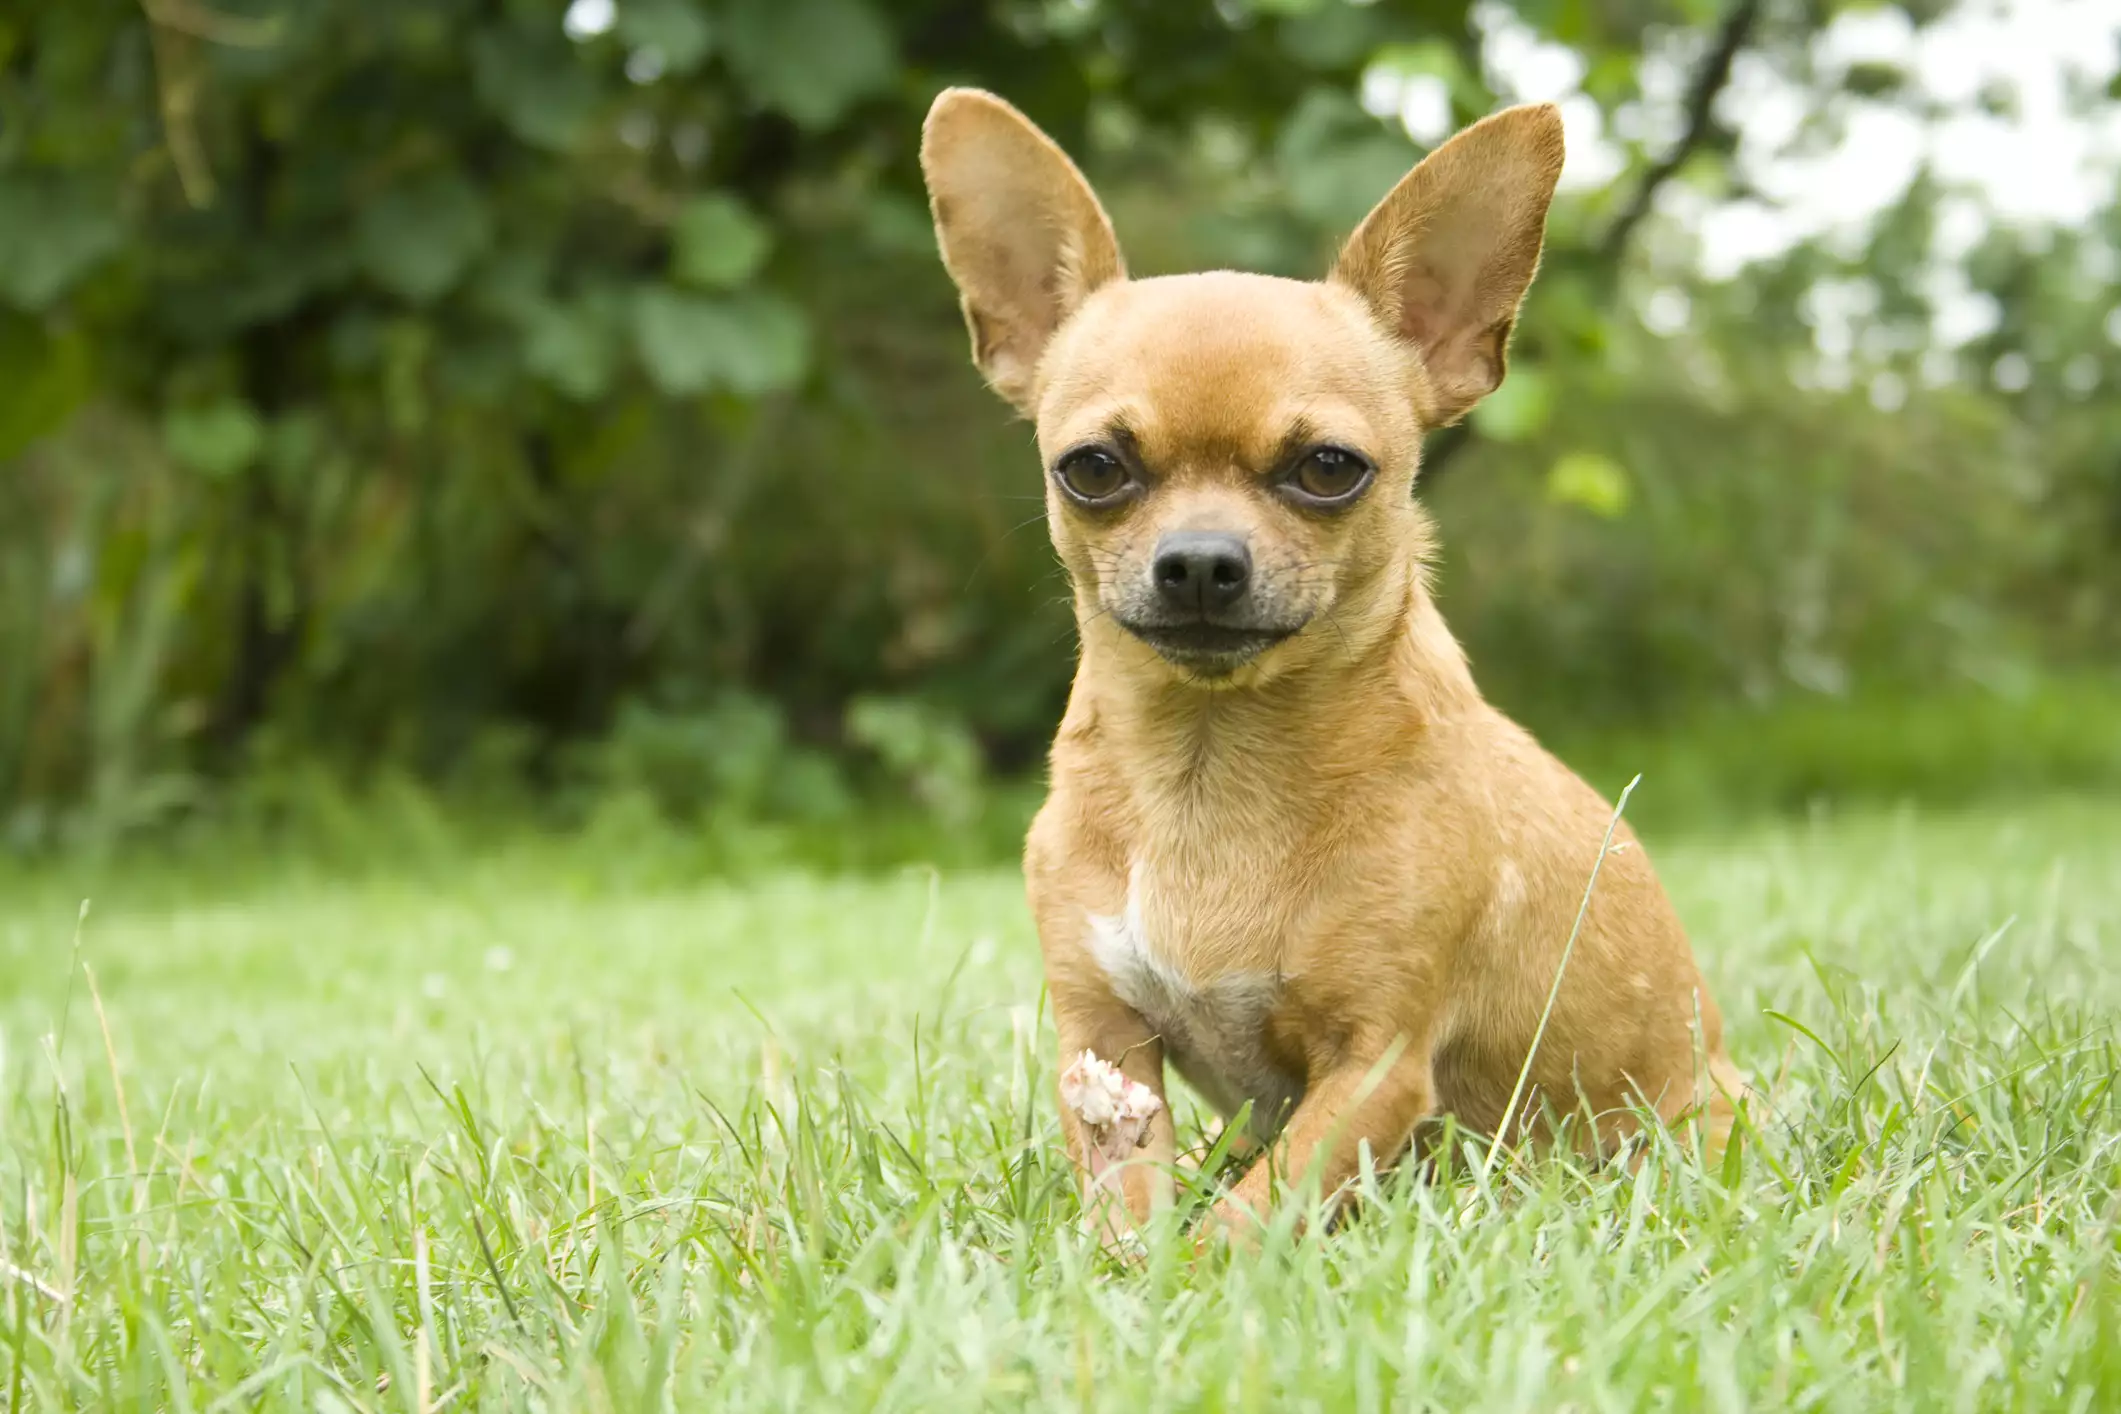 Small tan chihuahua dog sits in grass